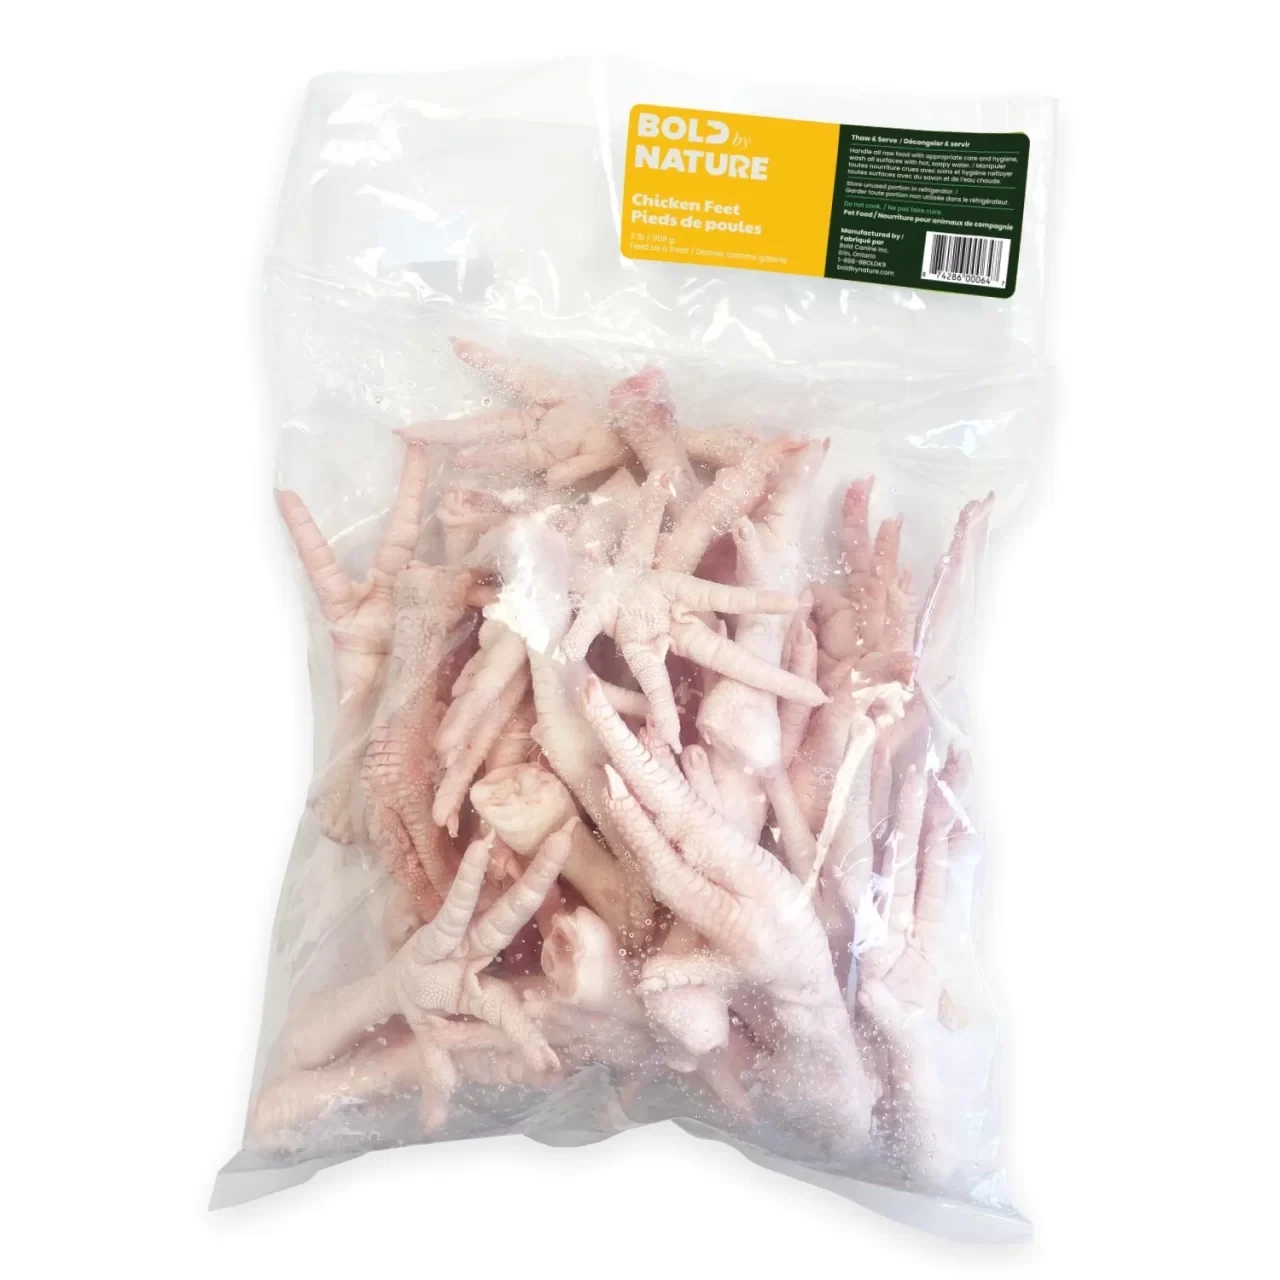 Bold by Nature - Chicken Feet 2lb